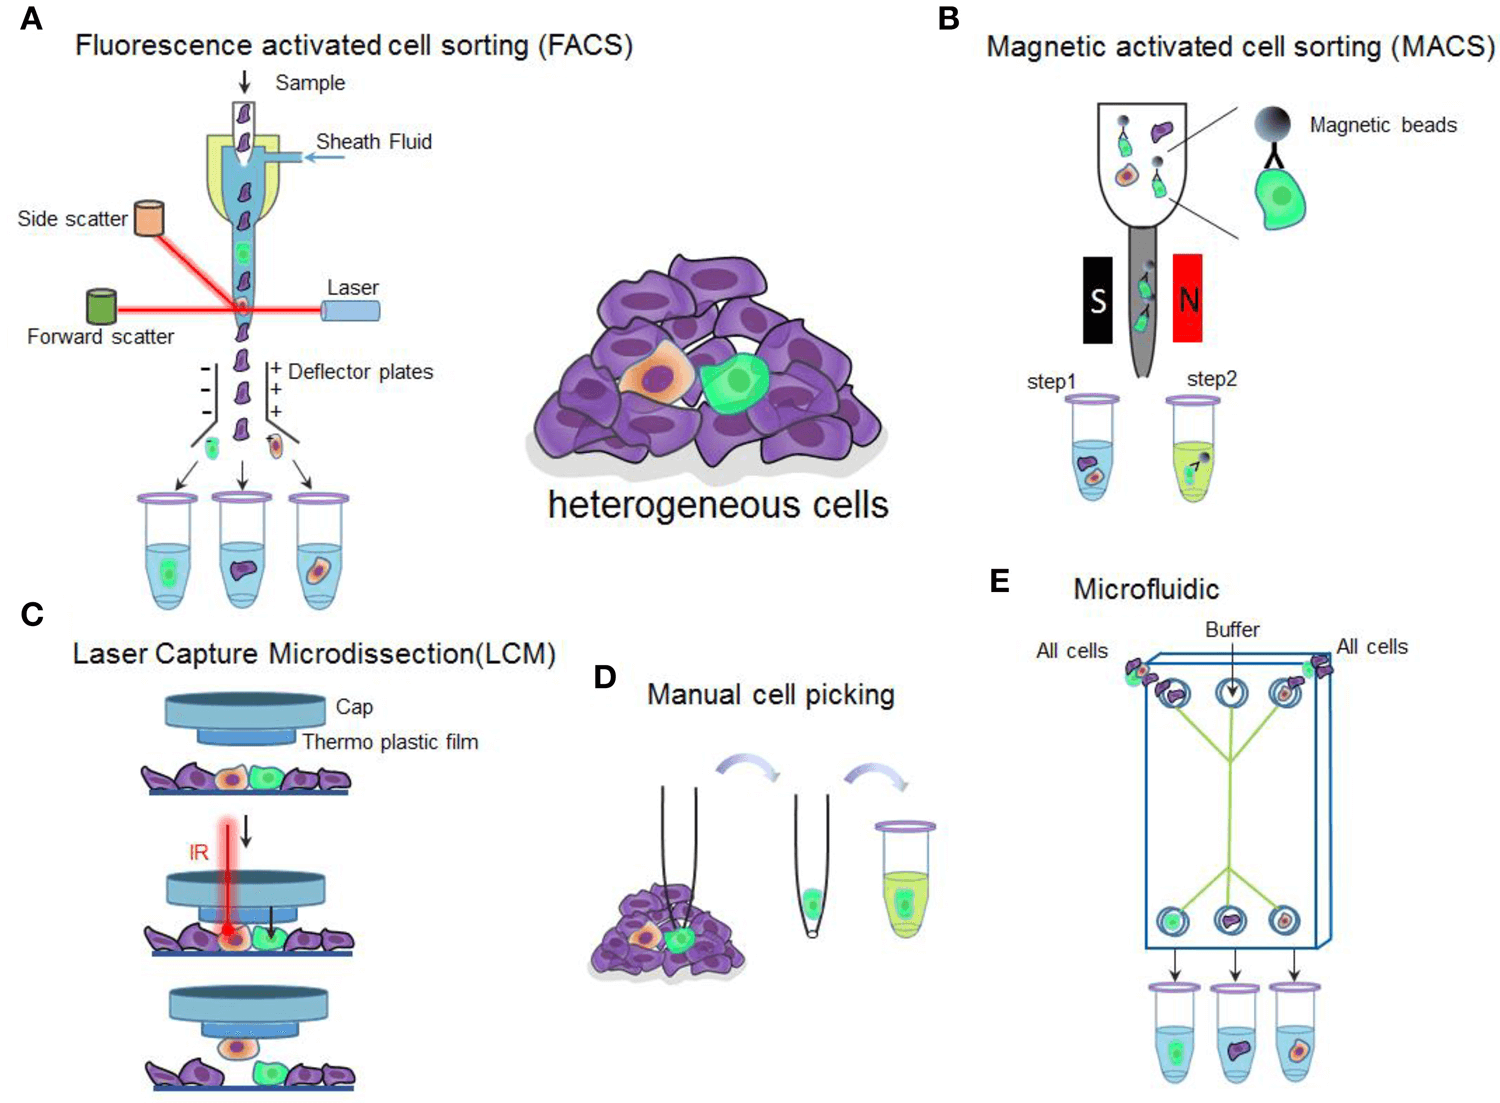 Cell purification methods based on cell surface antigen expression. (Matula T J, et al., 2018)